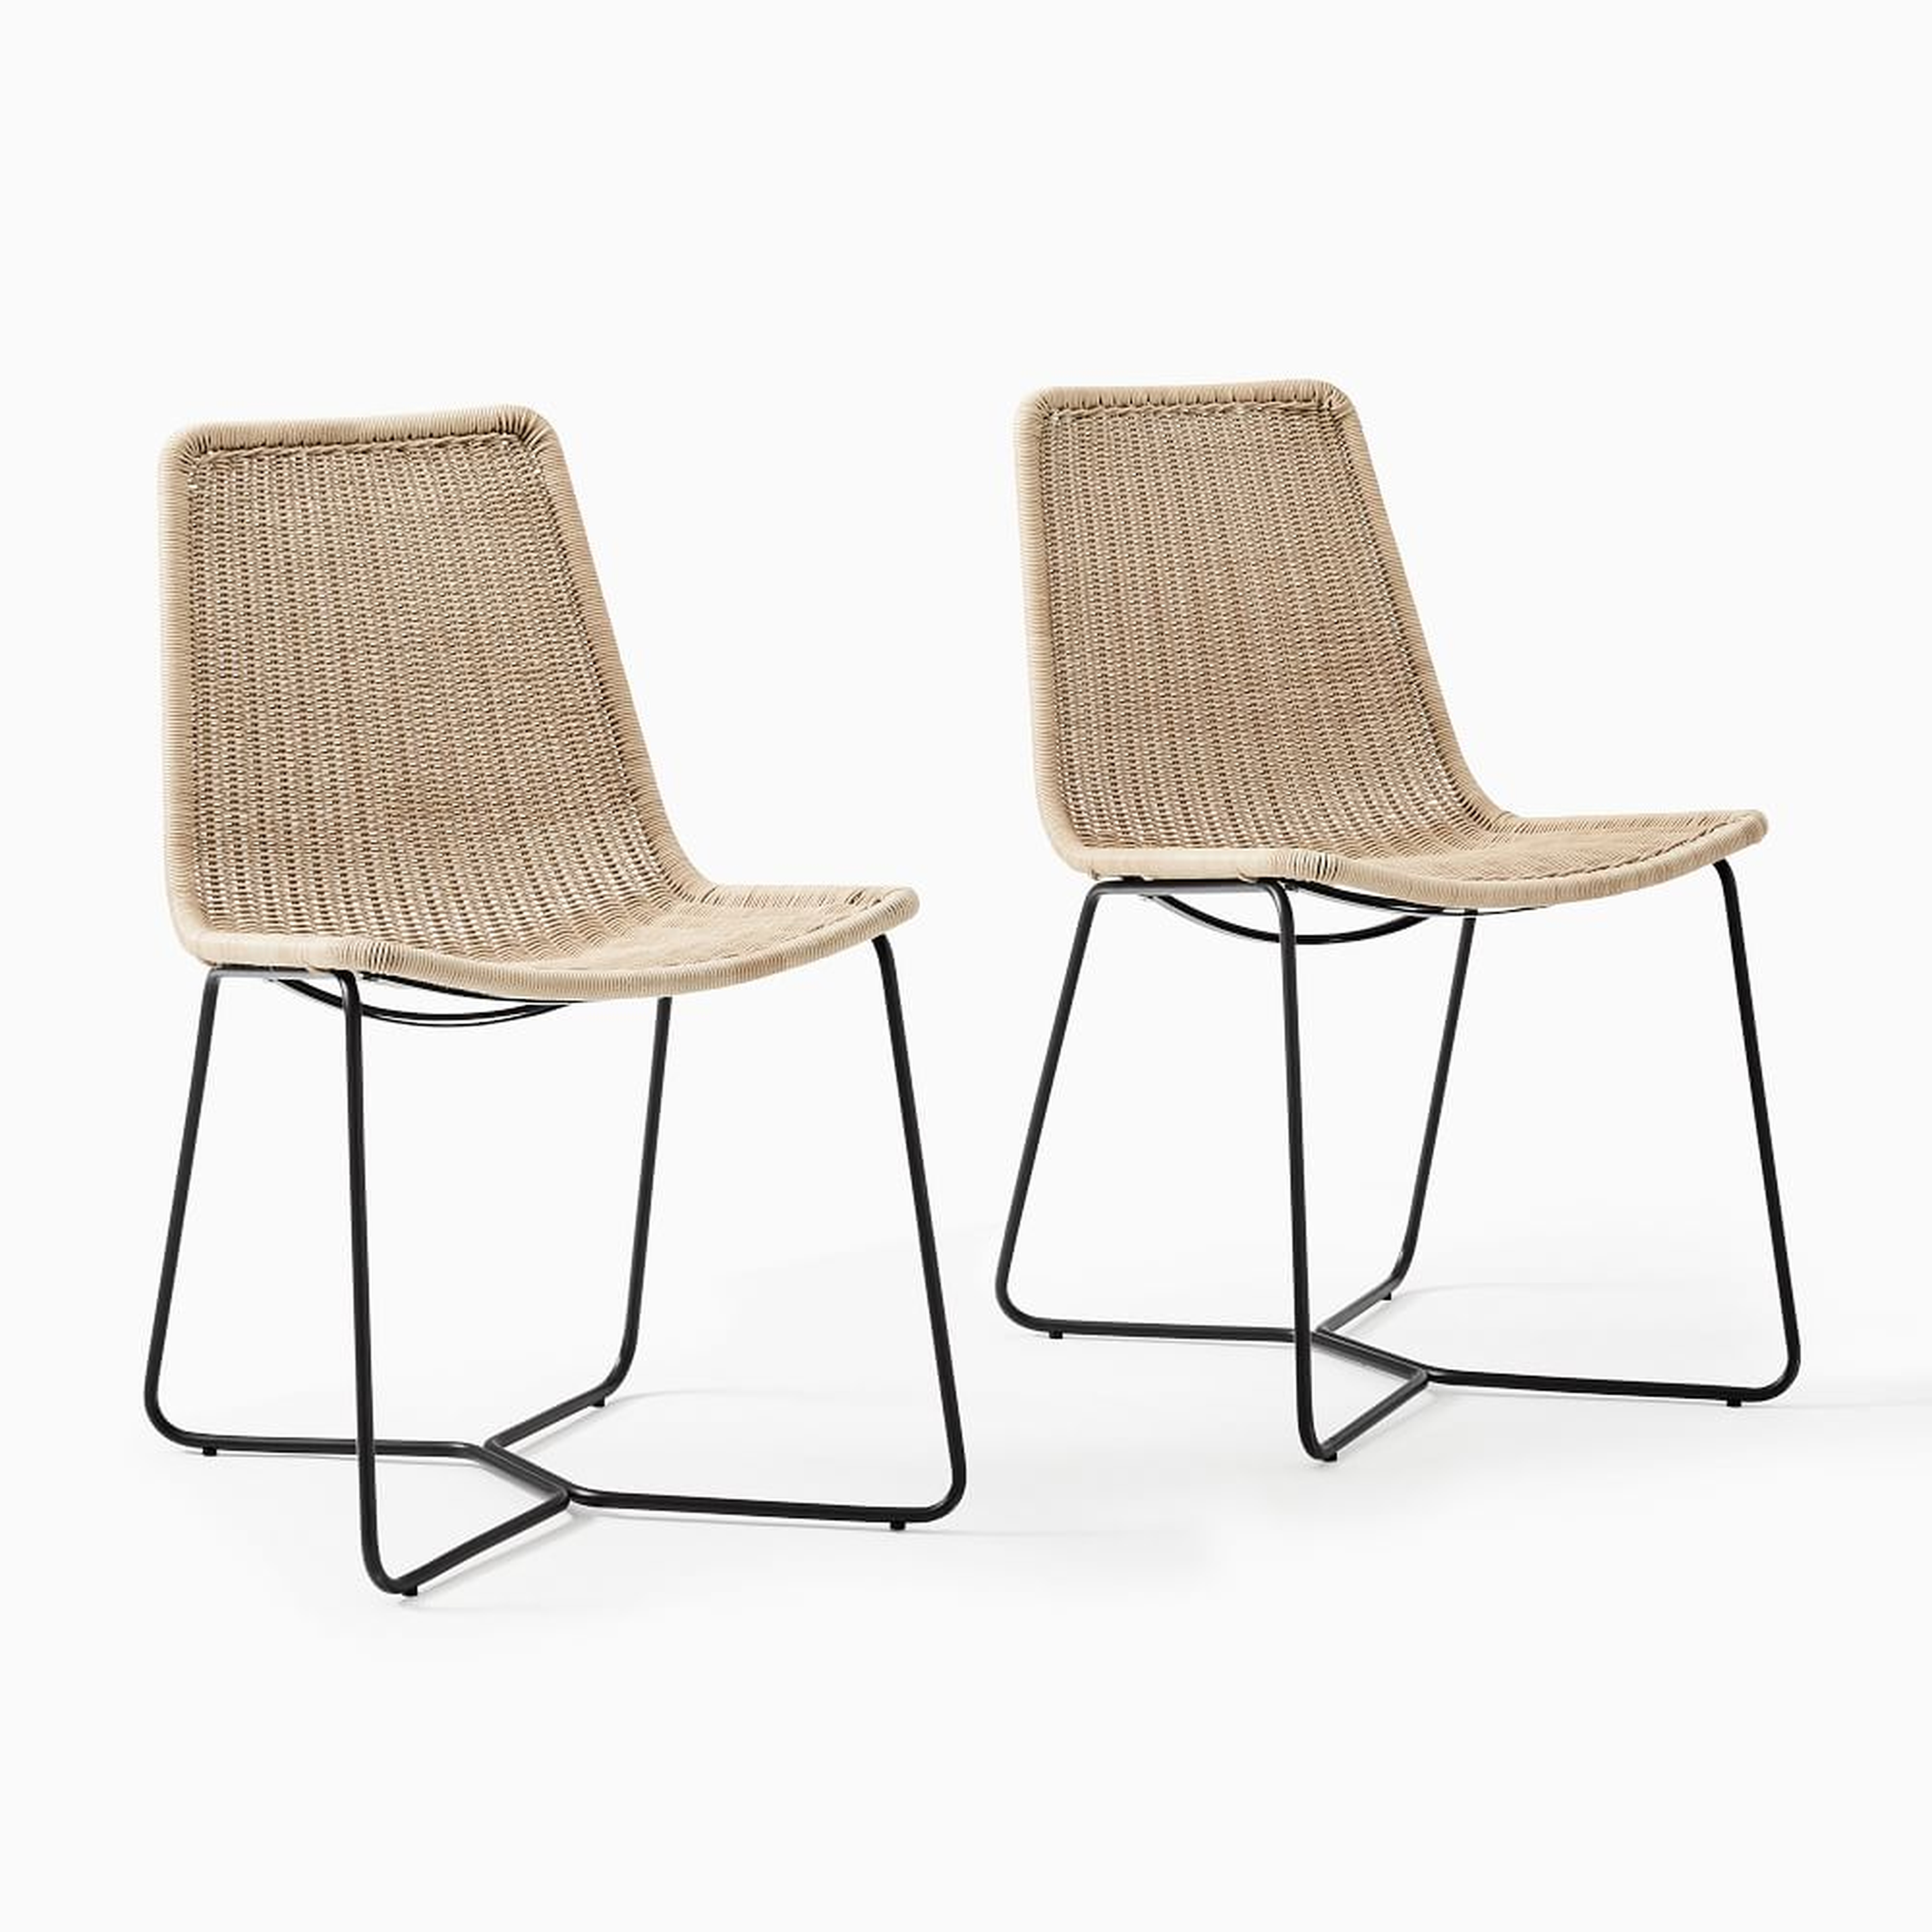 Slope Outdoor Dining Chair, S/2 Natural - West Elm